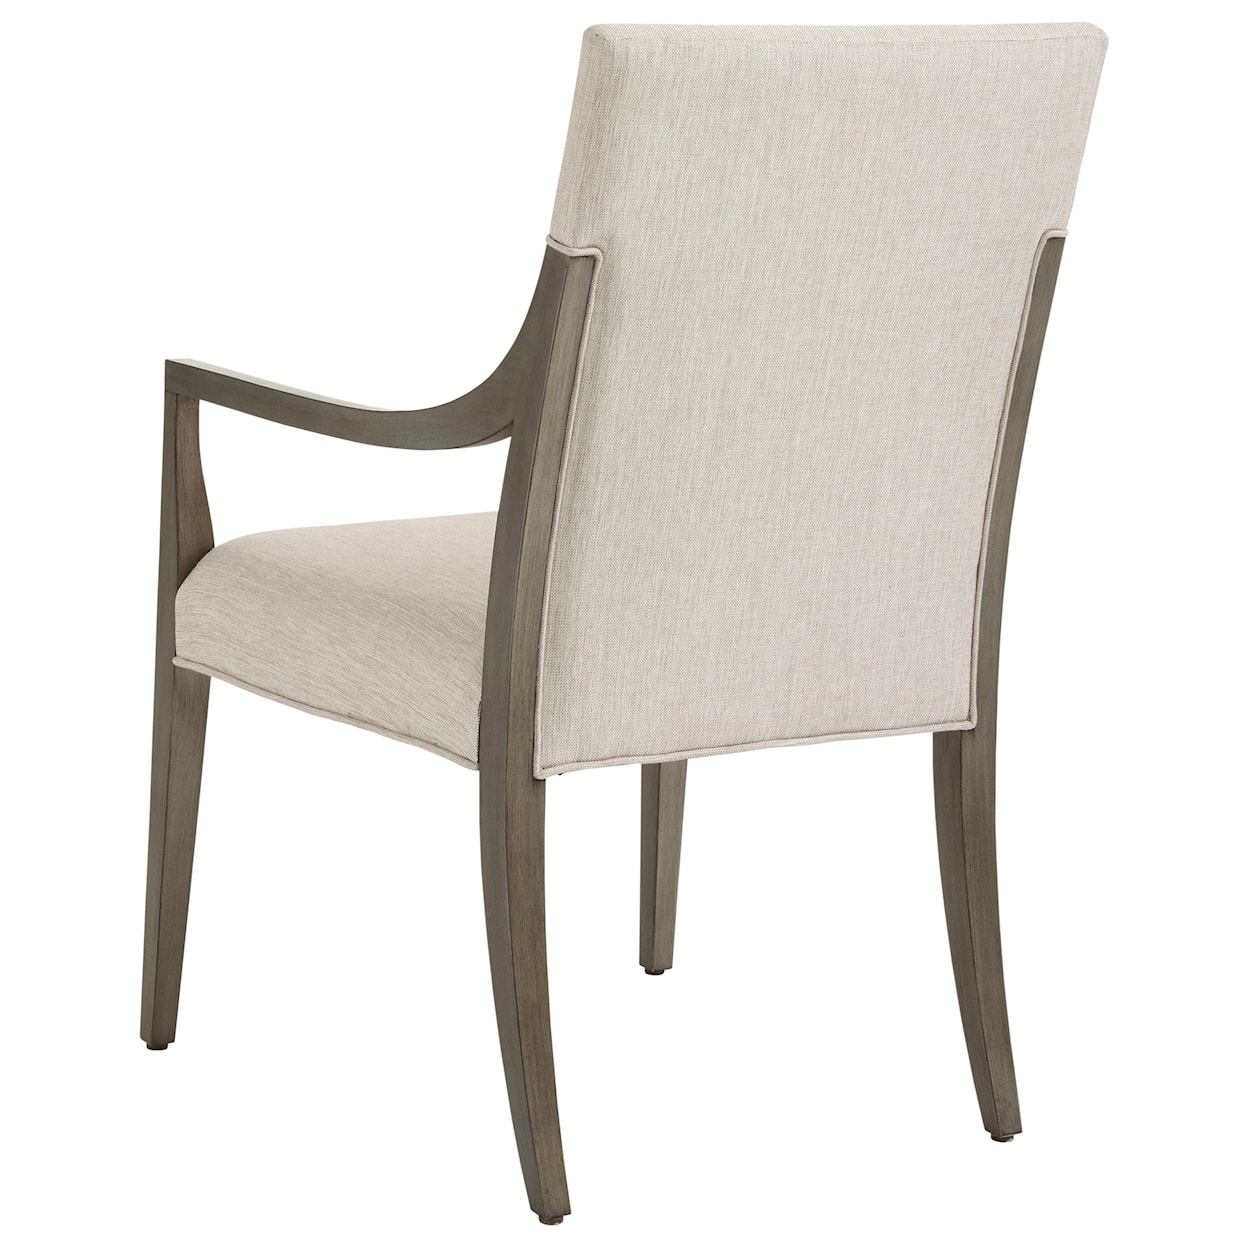 Lexington Ariana Saverne Upholstered Arm Chair (married)